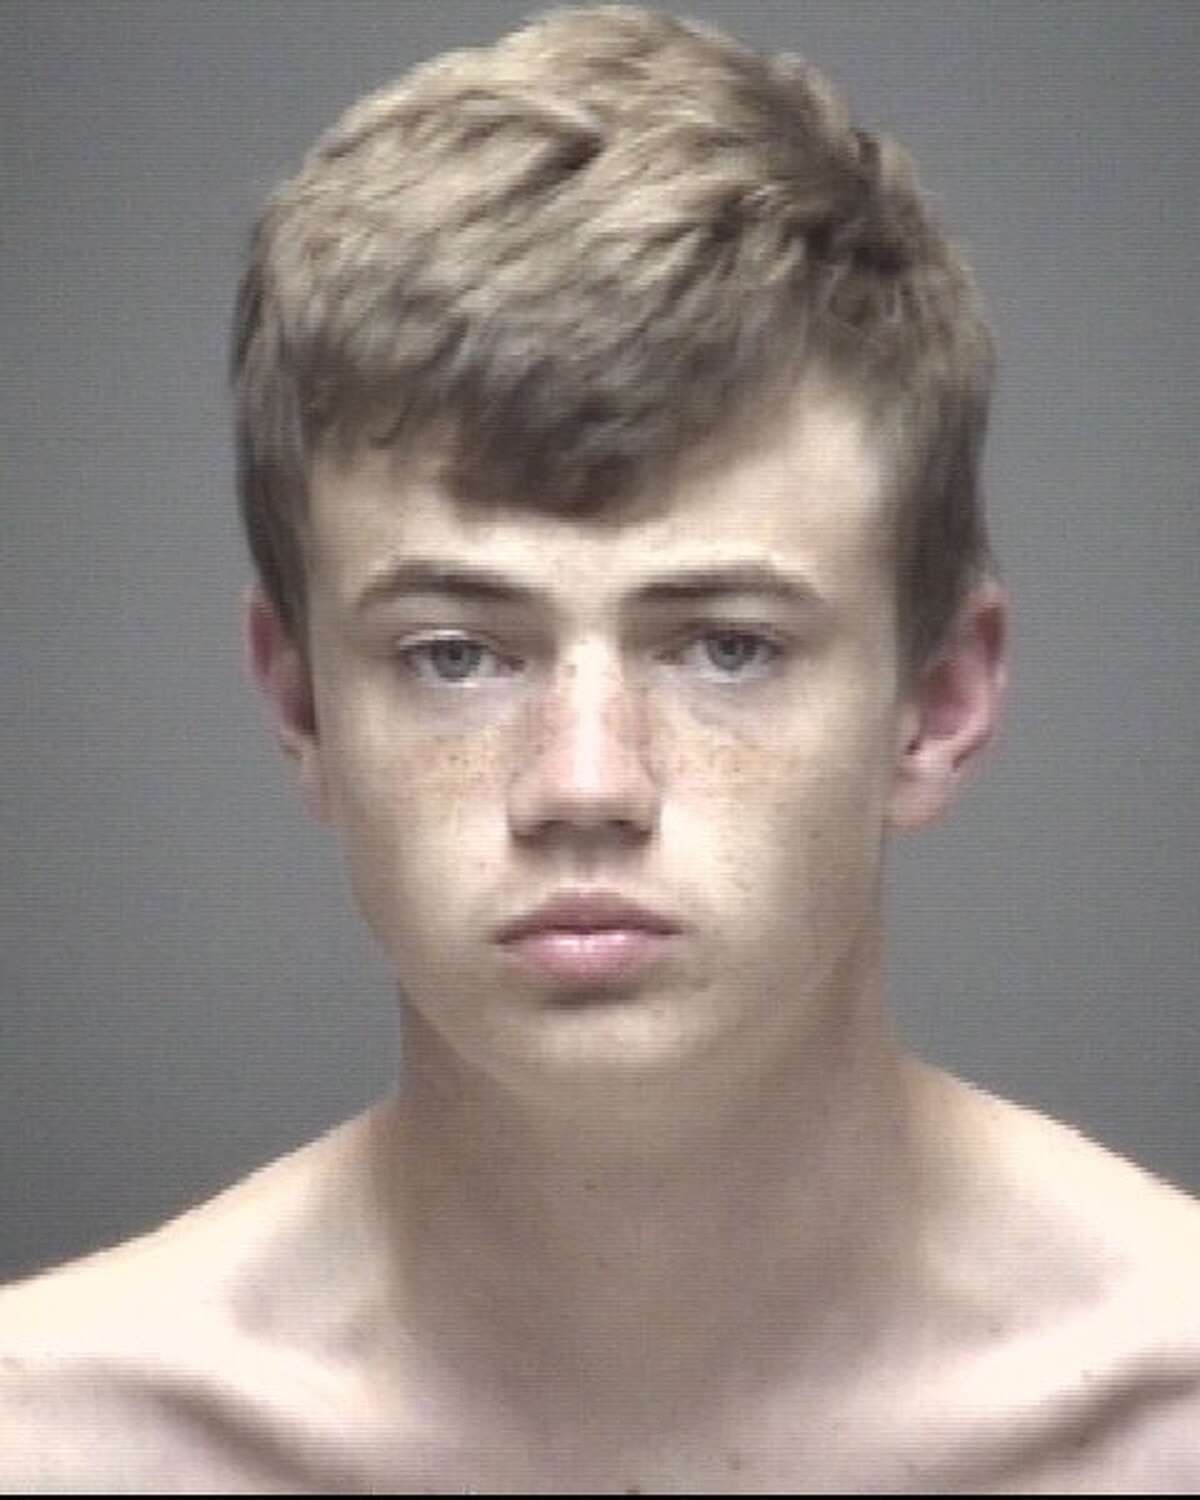 Austin Kyle Shields, 17, of Cleveland.Charge: Minor consuming an alcoholic beverage, no seat belt Photo: GCSO